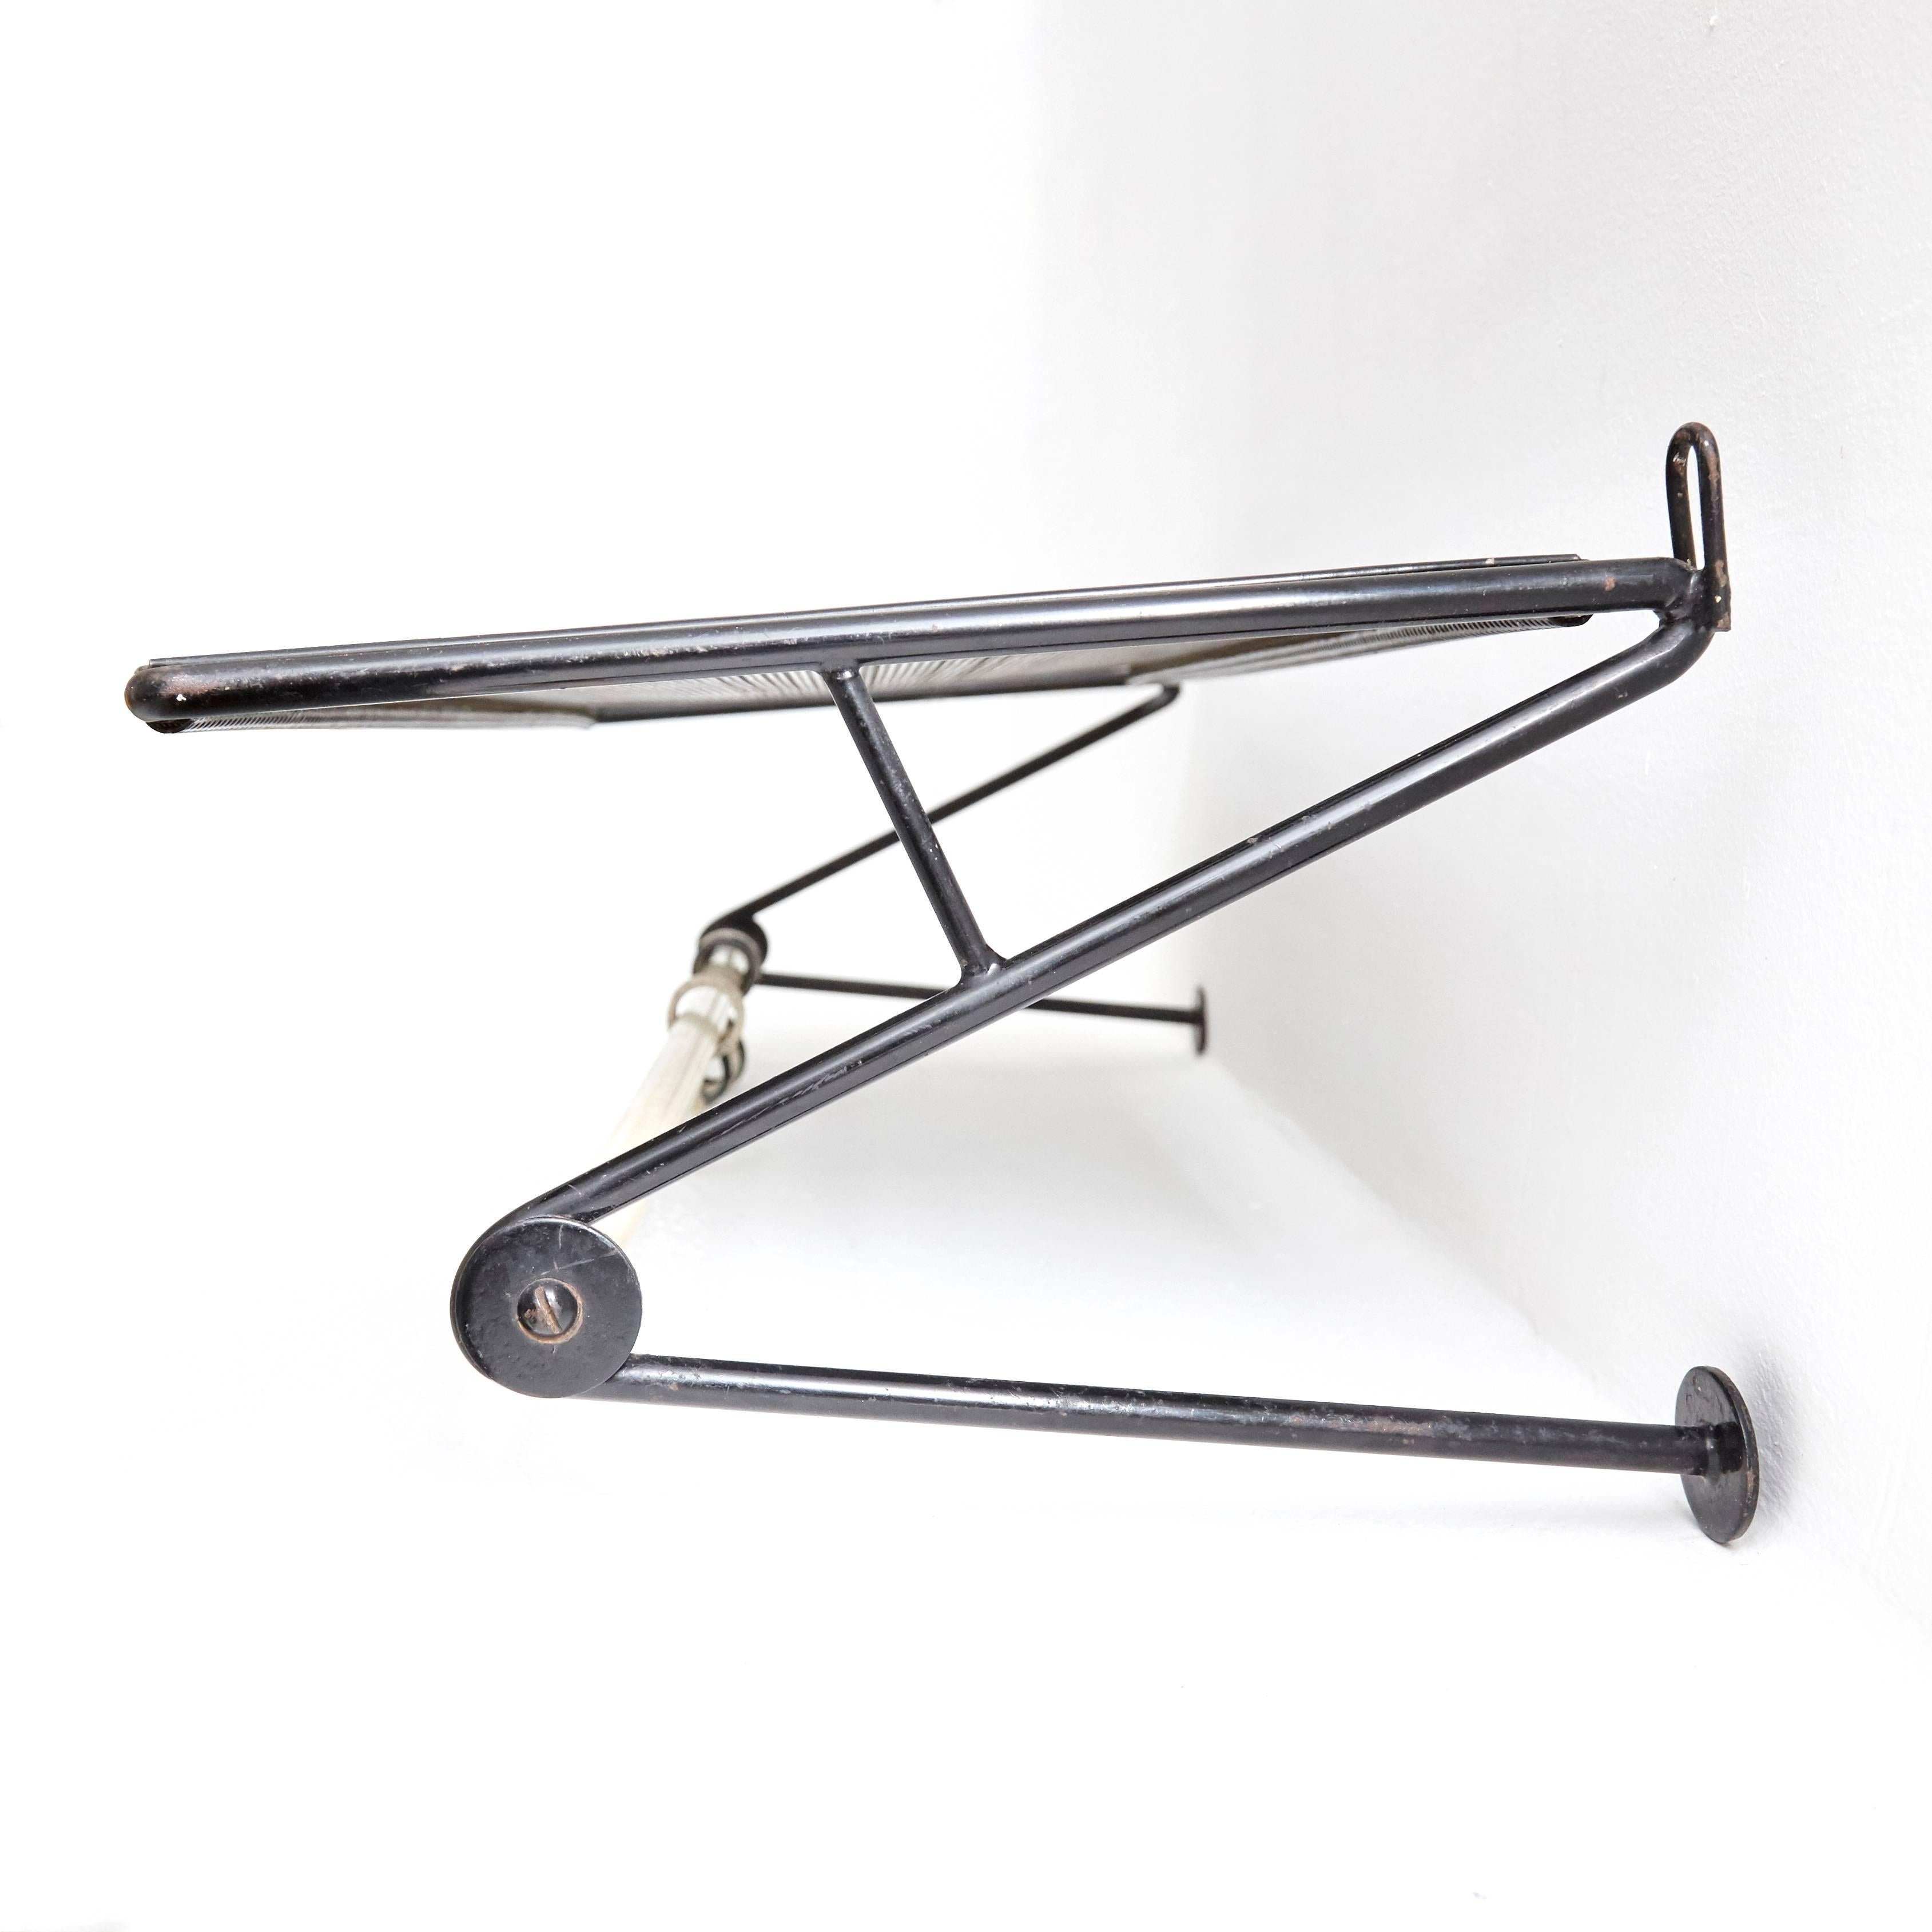 Coat rack designed by Mathieu Mategot, manufactured by Artimeta (Netherland), circa 1950.
Perforated, lacquered metal.

In good original condition, with minor wear consistent with age and use, preserving a beautiful patina.

Mathieu Mategot